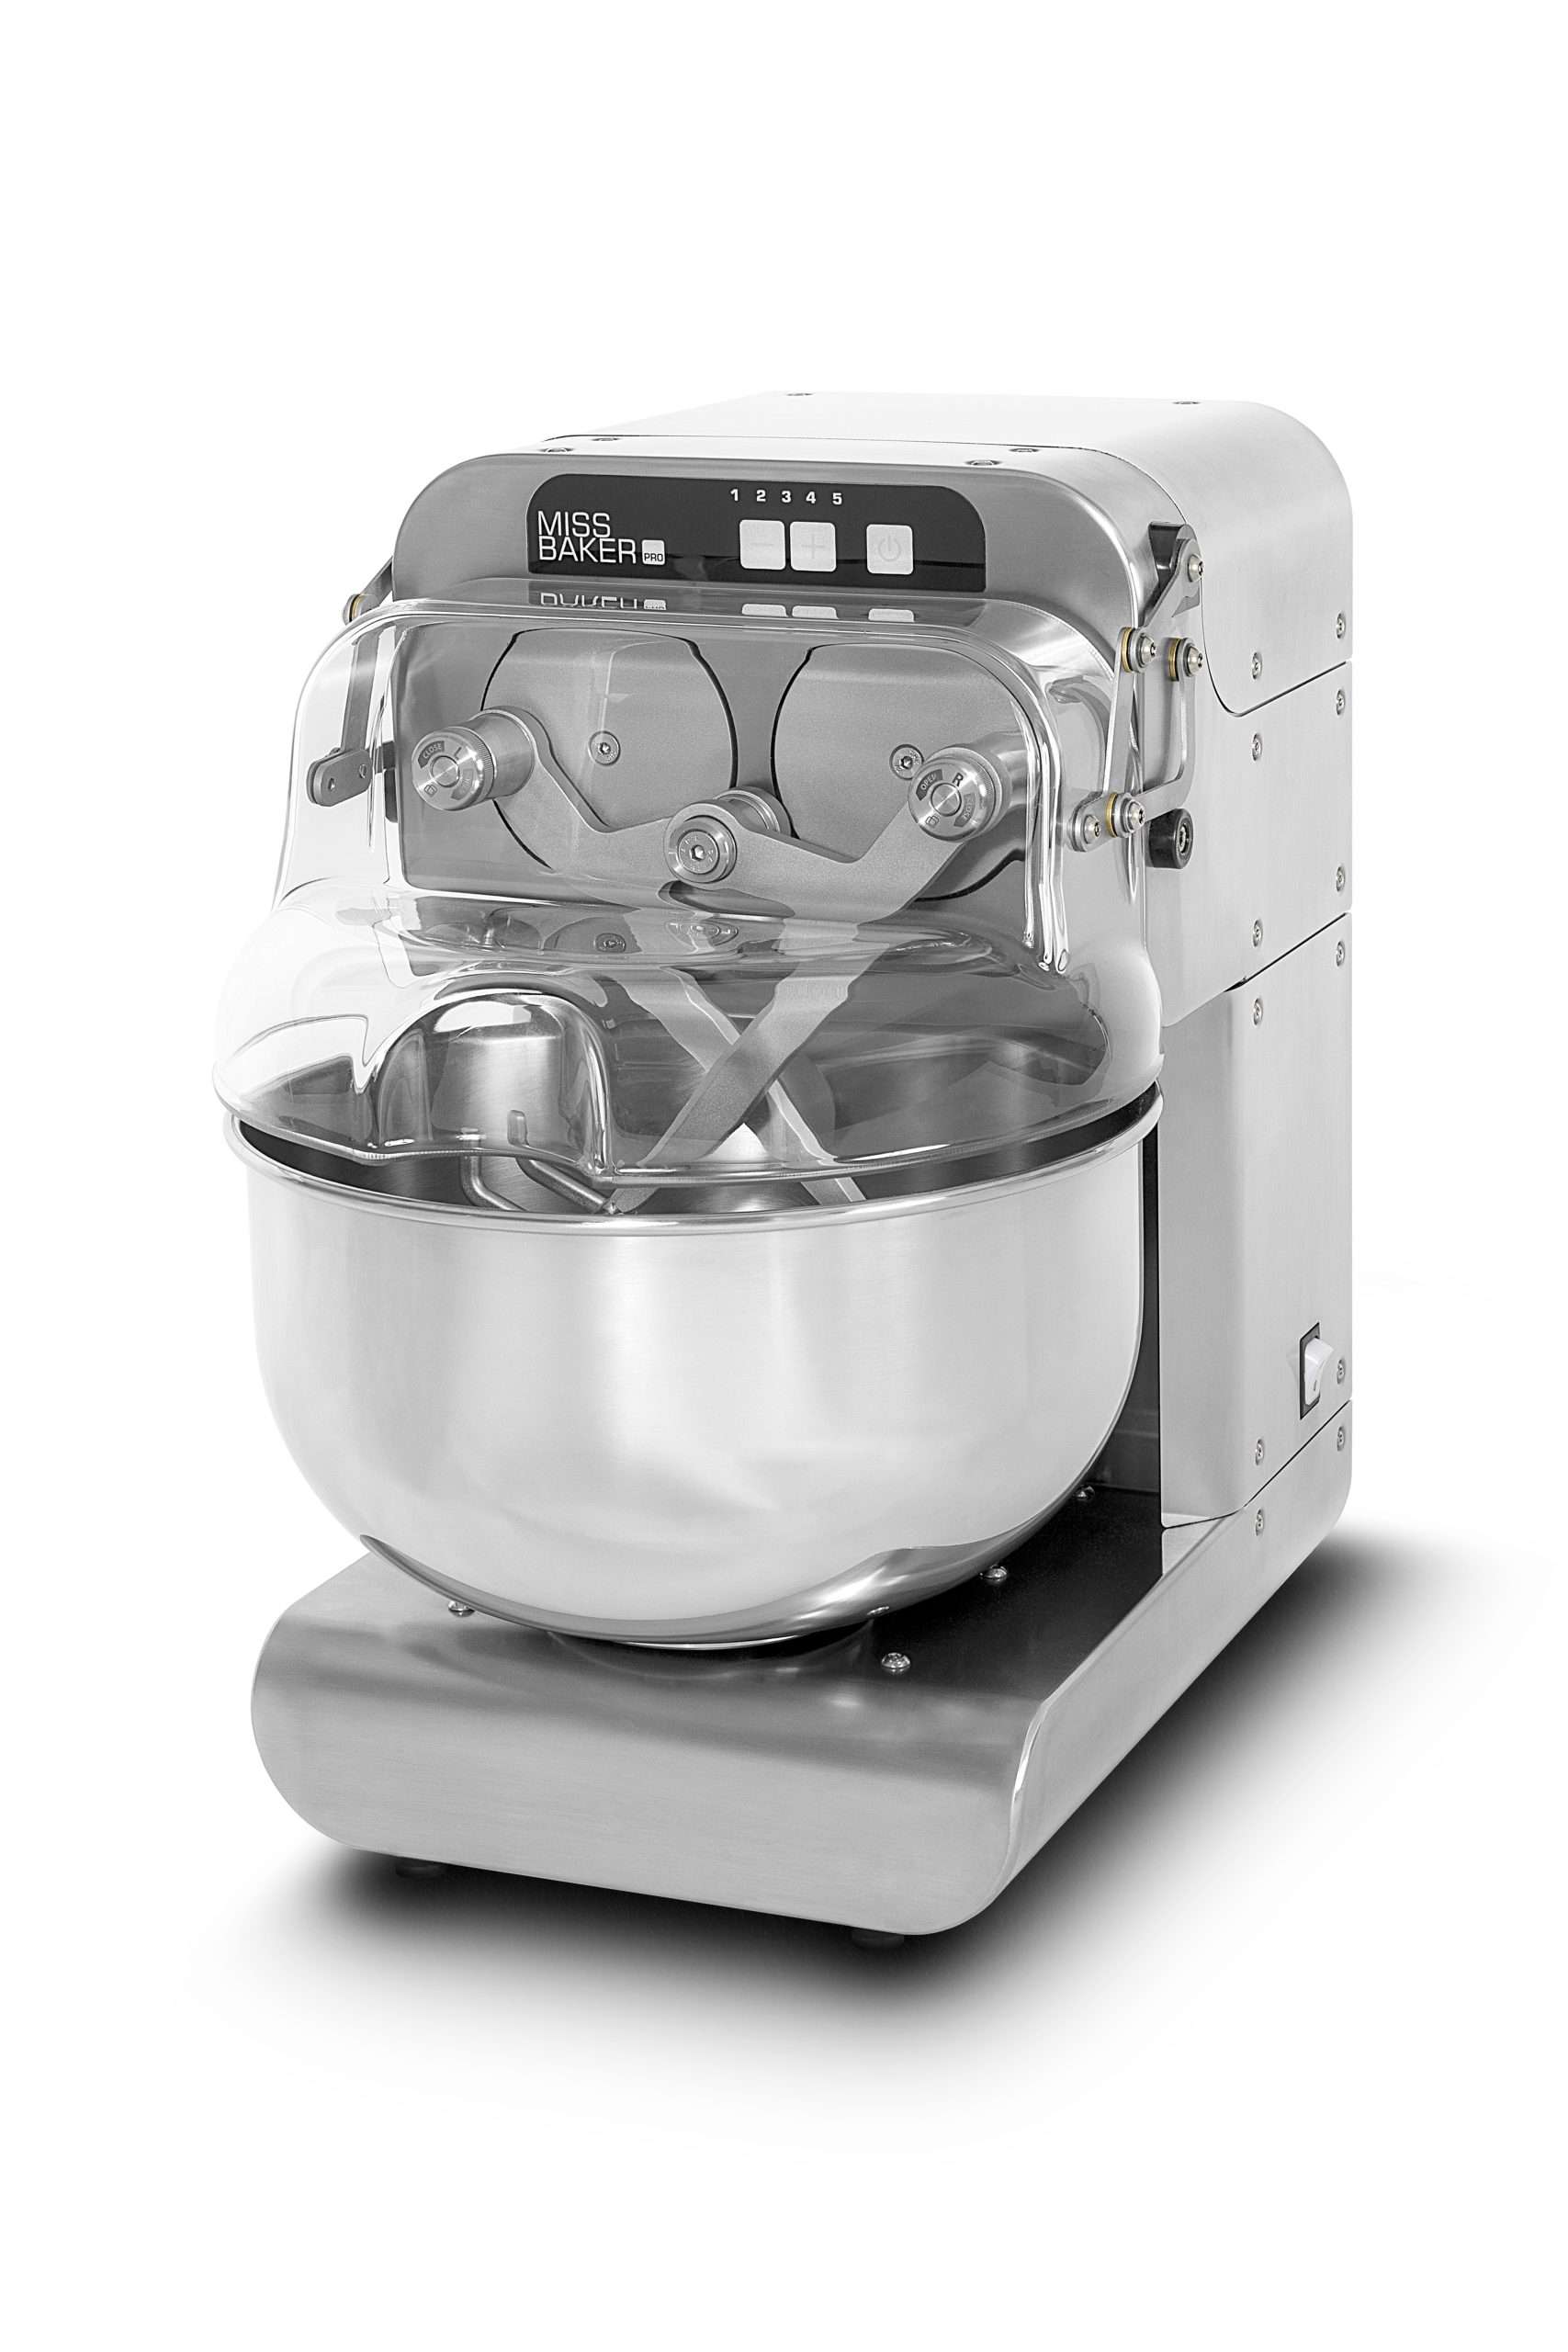 Miss Baker Pro – 4.5kg finished /10 Litre Double Arm Mixer, 5 speed, Stainless steel (INOX)